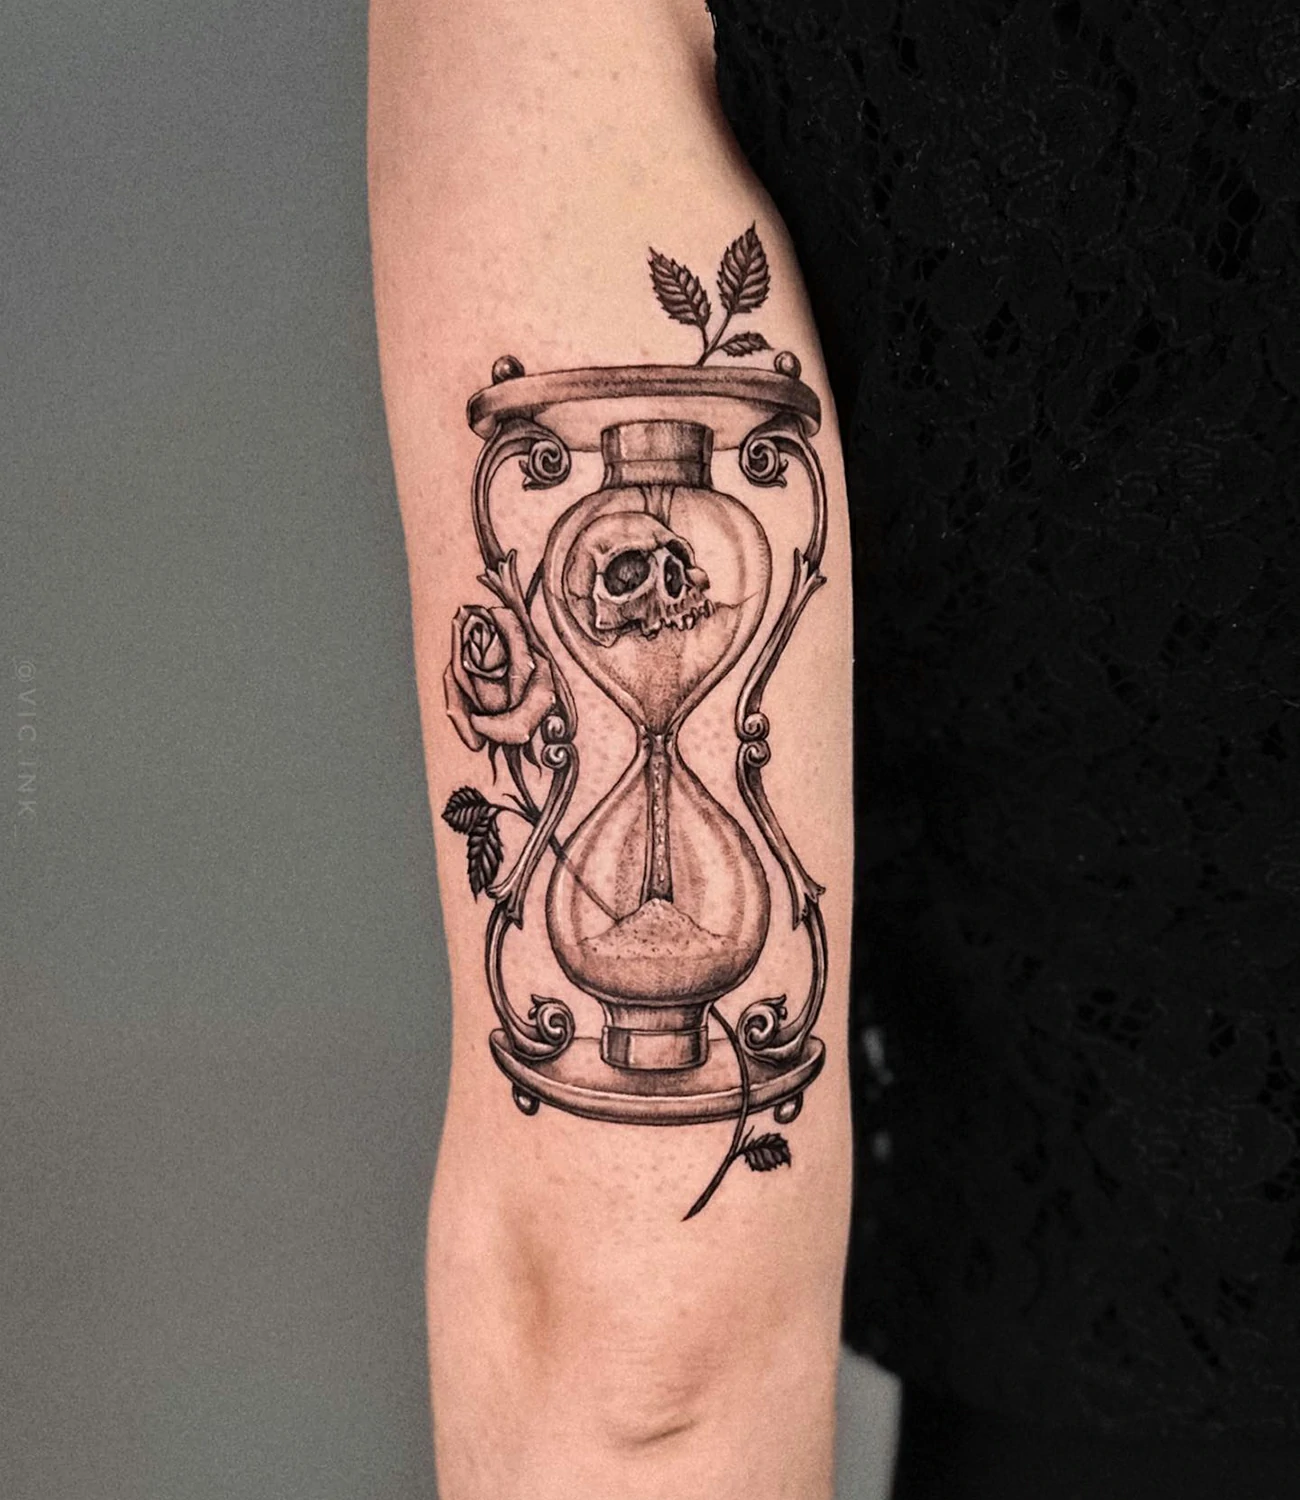 memento mori hourglass tattoo: An hourglass tattoo with the phrase "memento mori," indicating the passage of time and the inevitability of death.